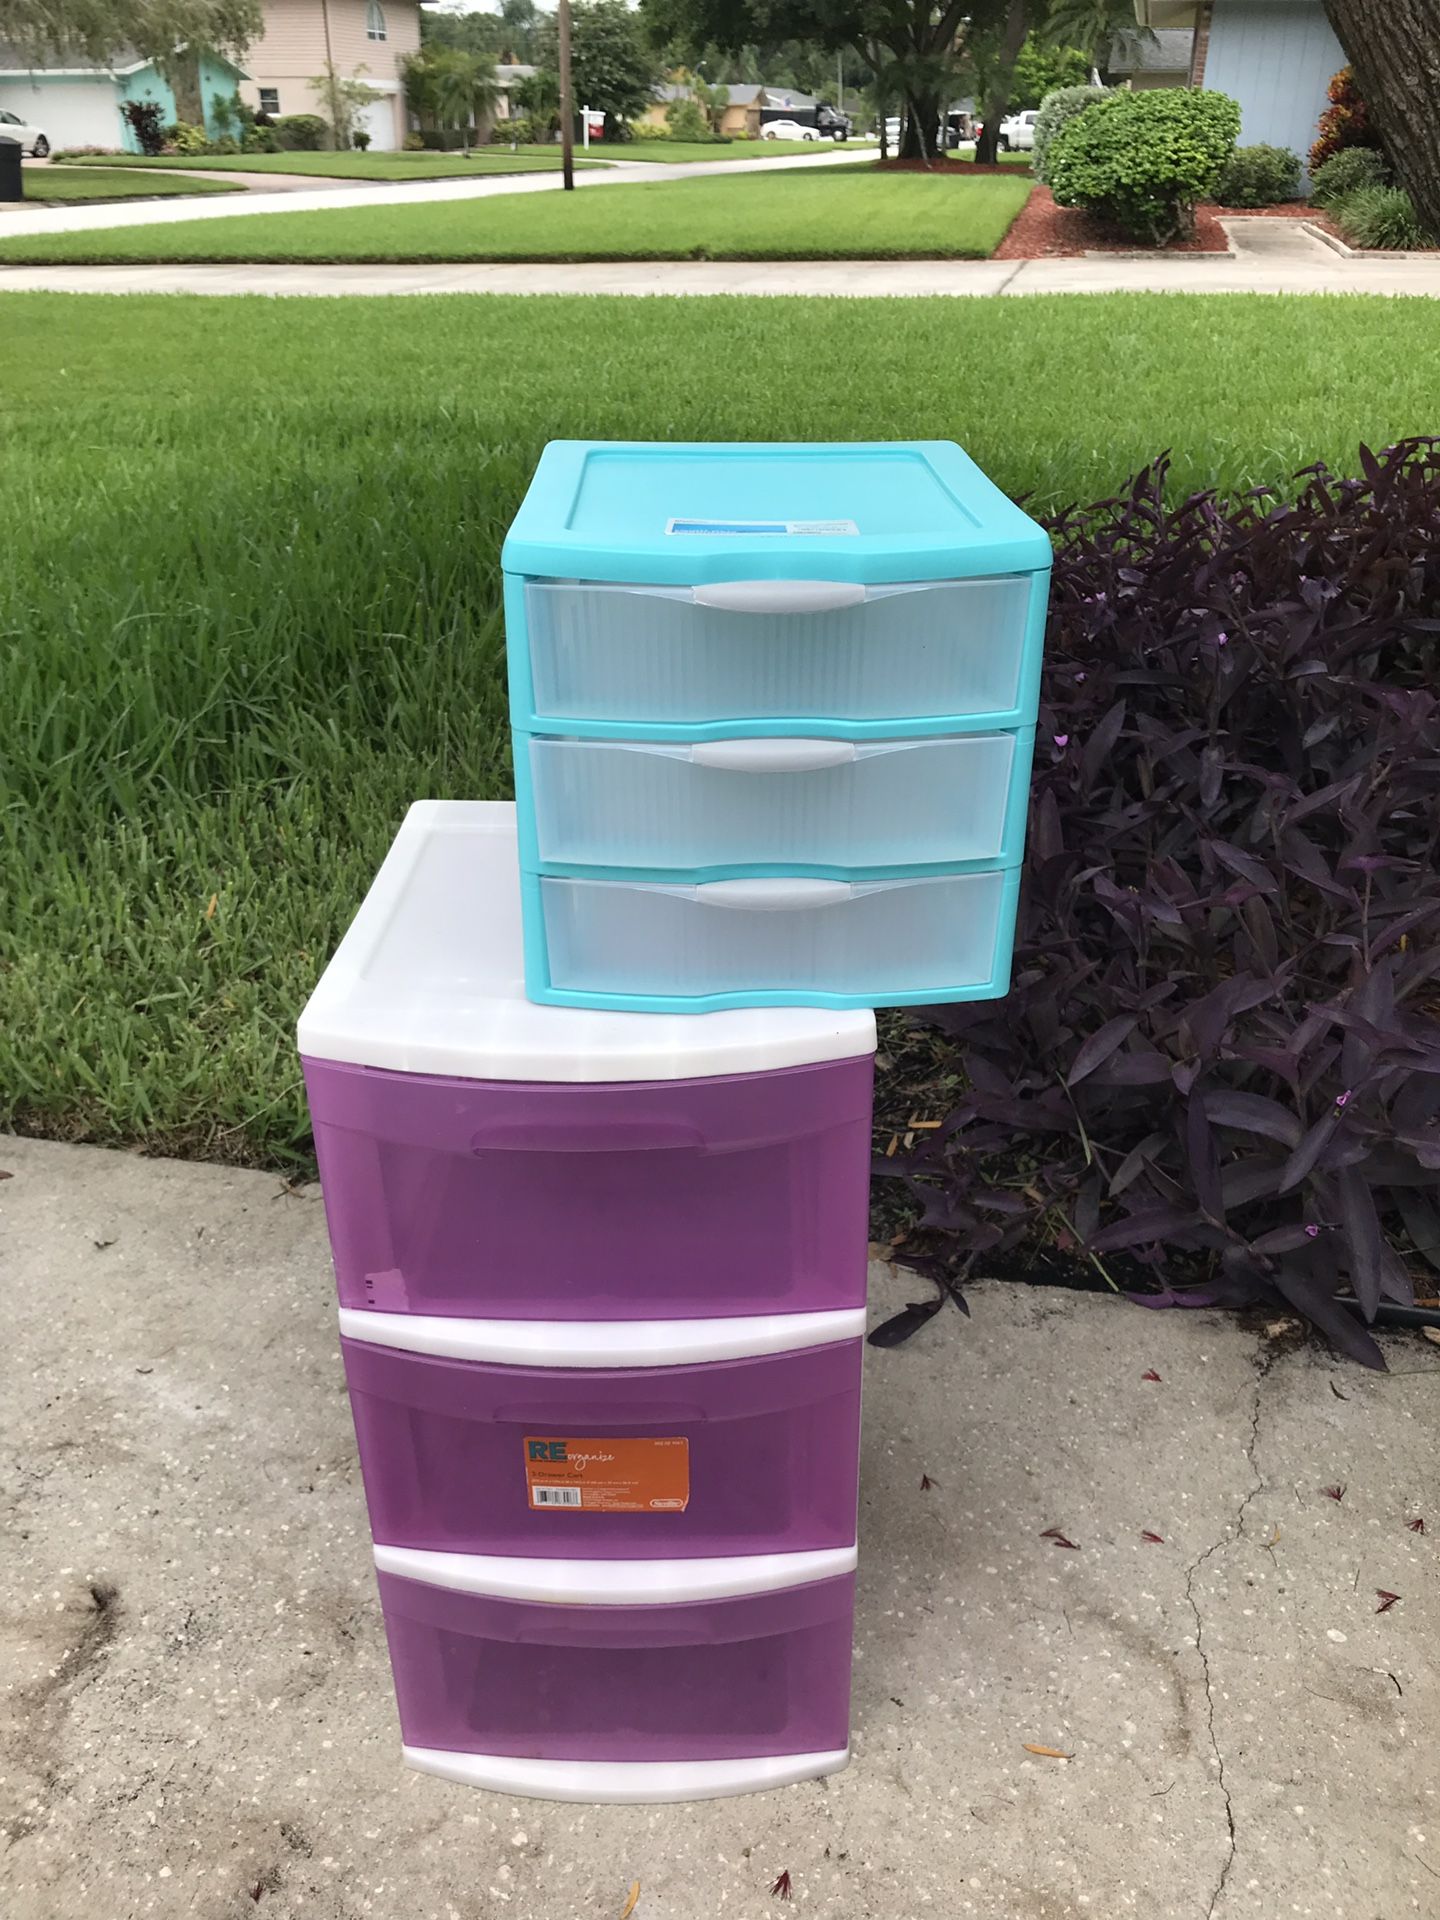 Storage container drawers - $8 large one $4 small one